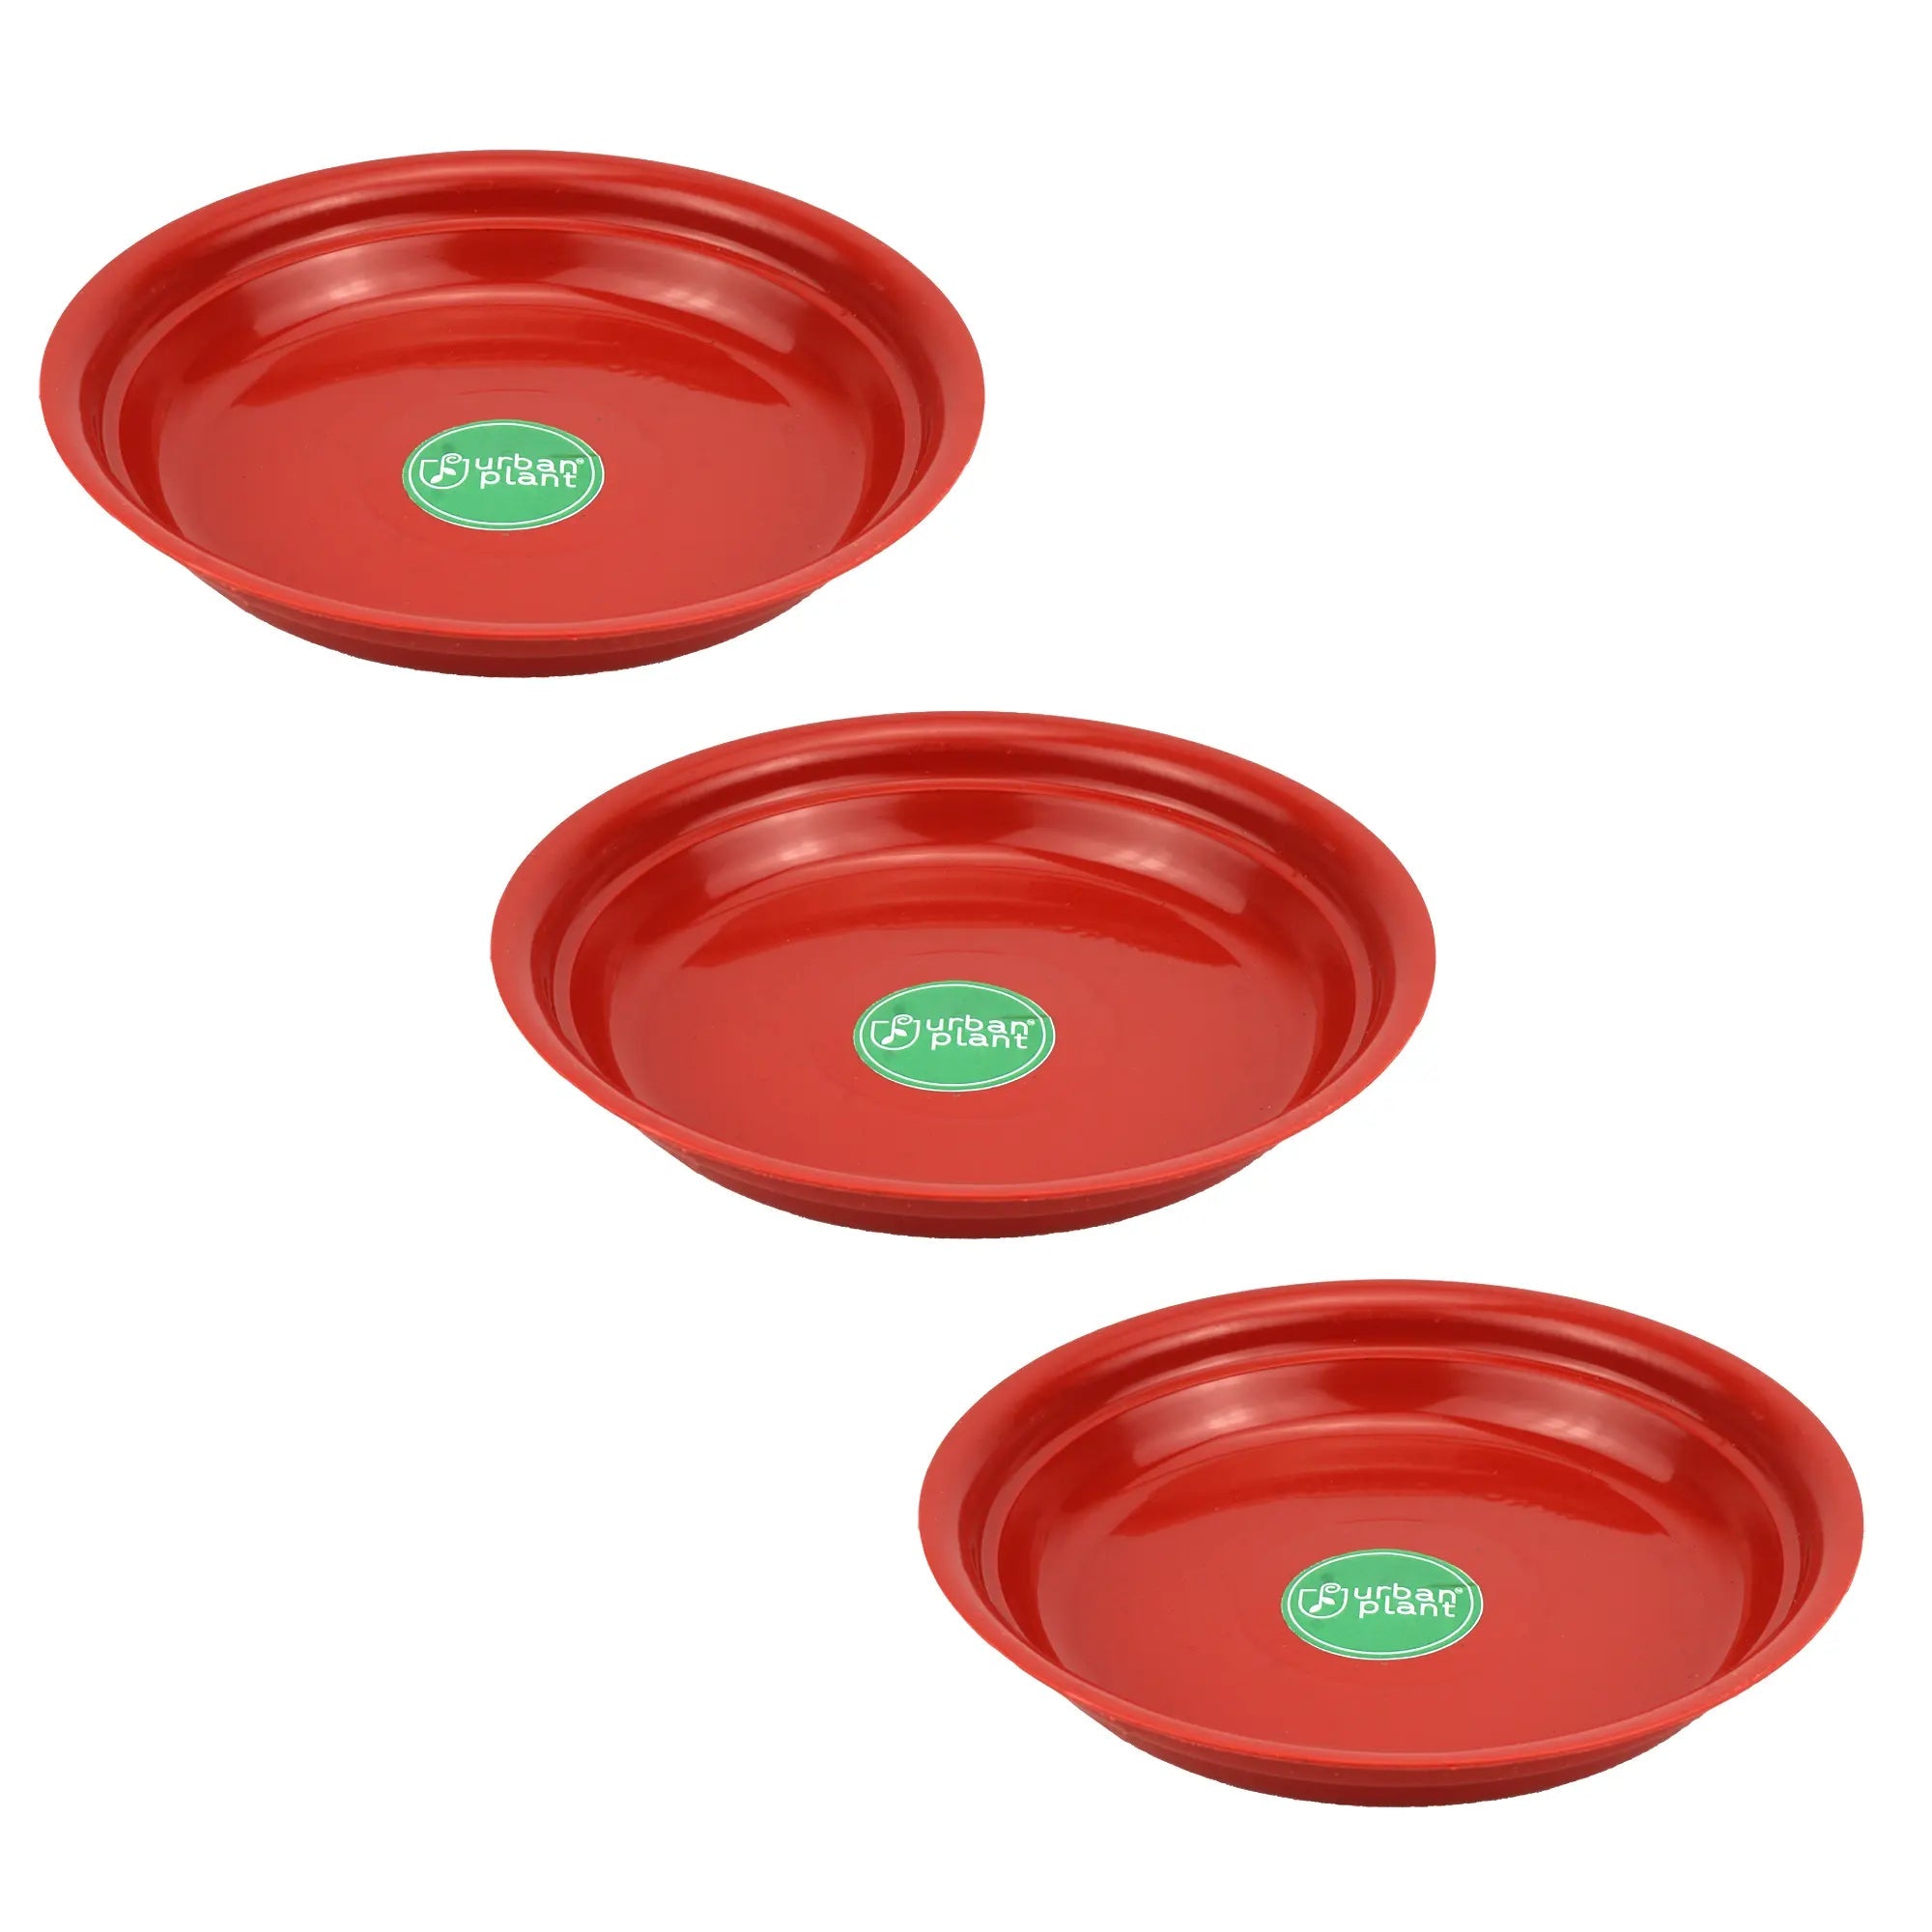 Urban Plant Round Bottom Tray (Plate/Saucer) for All Type of Pots Urban Plant 6 Inch Set of 3 